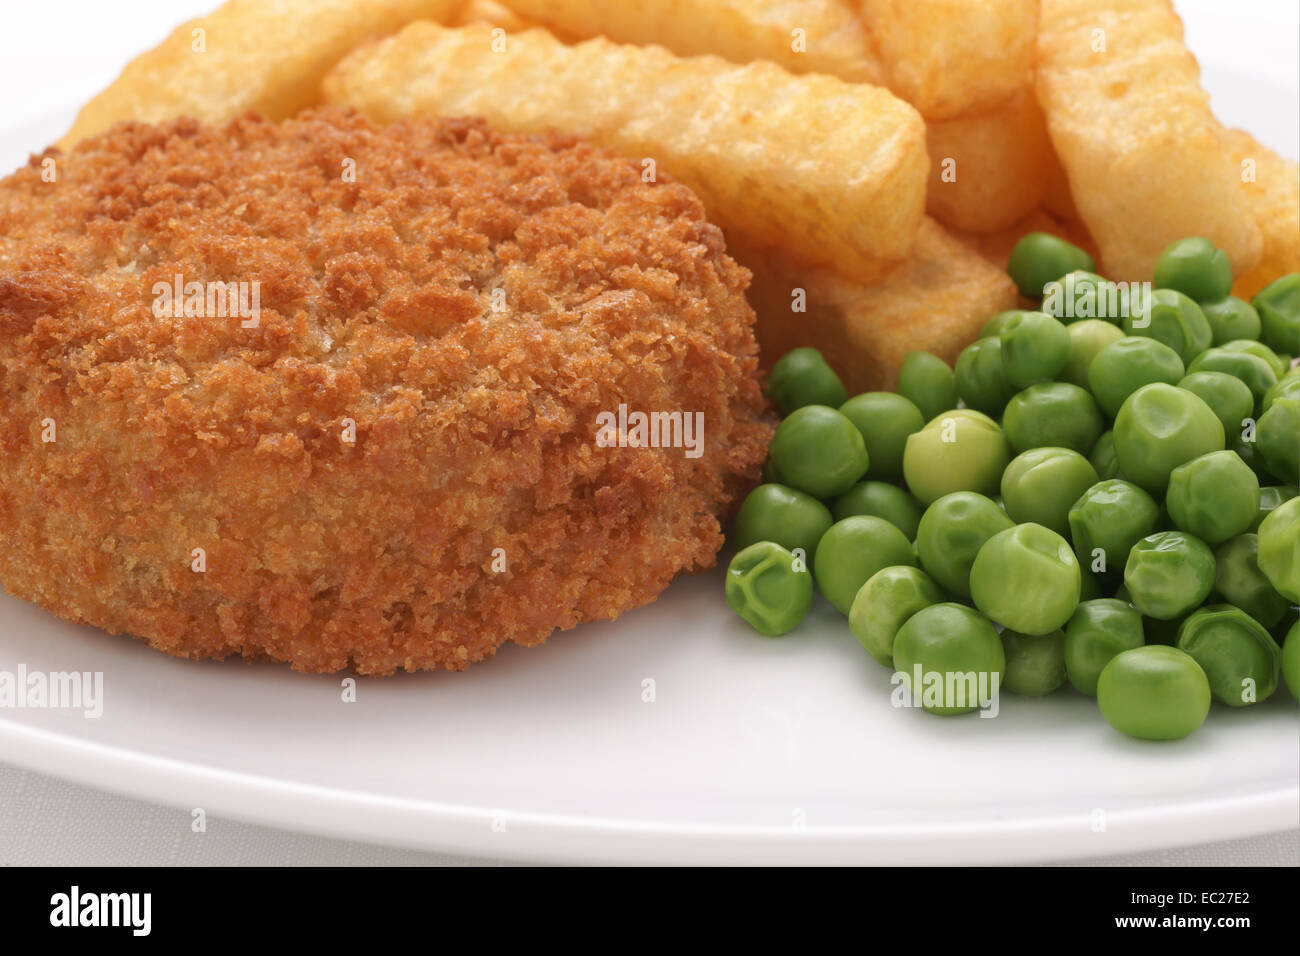 Fishcake made with crumbed fish and potato served with chips and peas Stock Photo